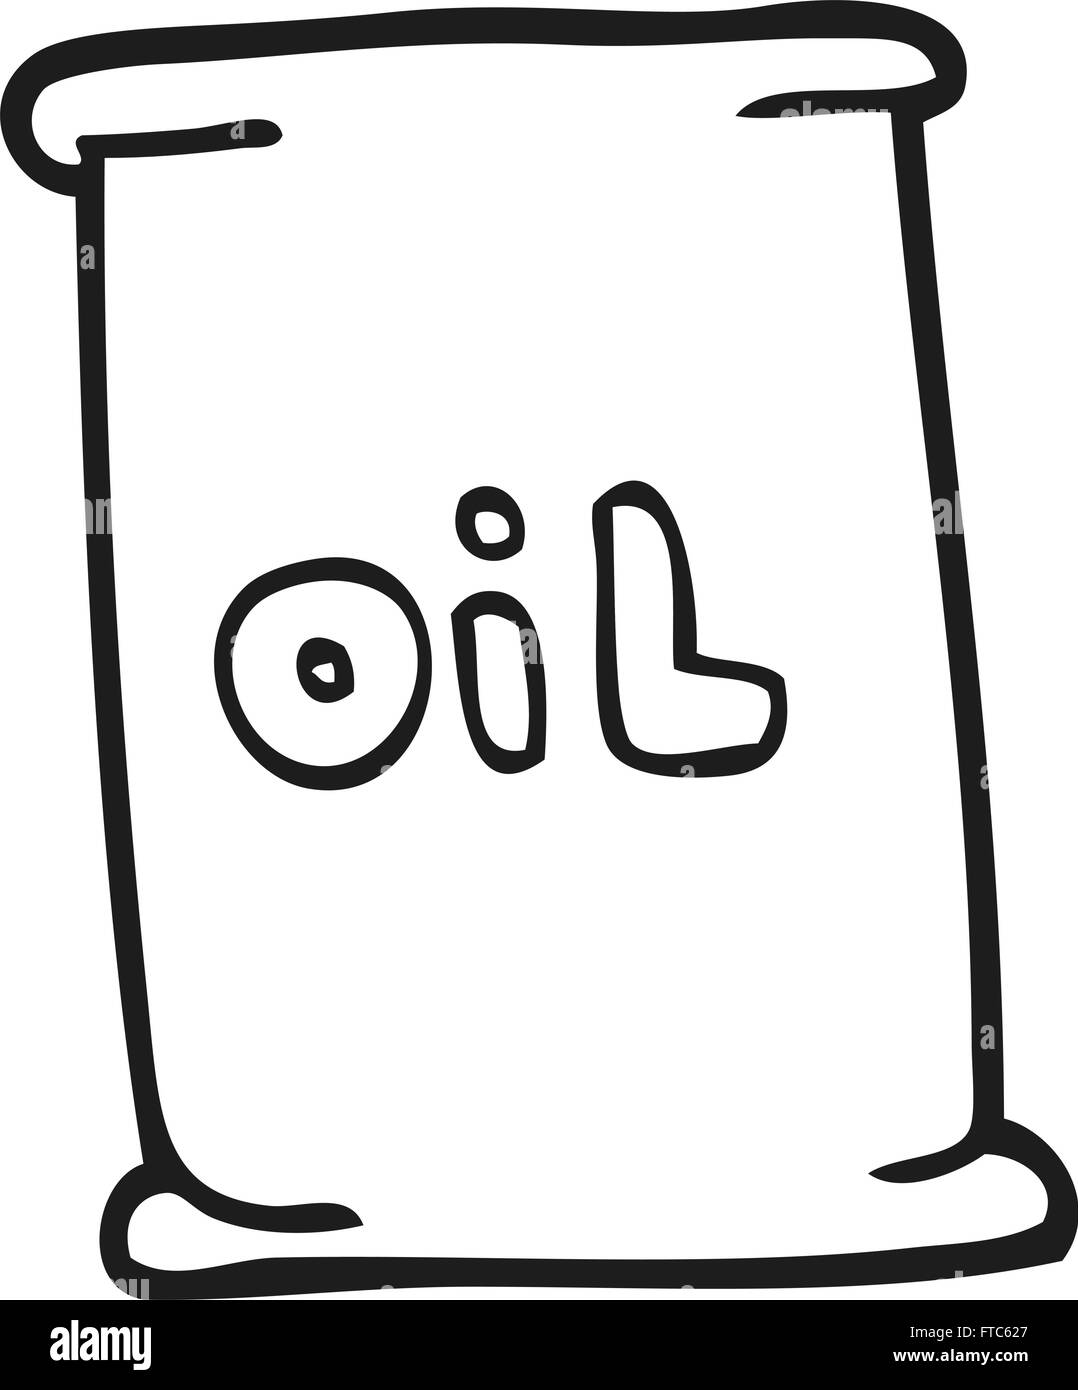 Oil can freehand Royalty Free Vector Image - VectorStock